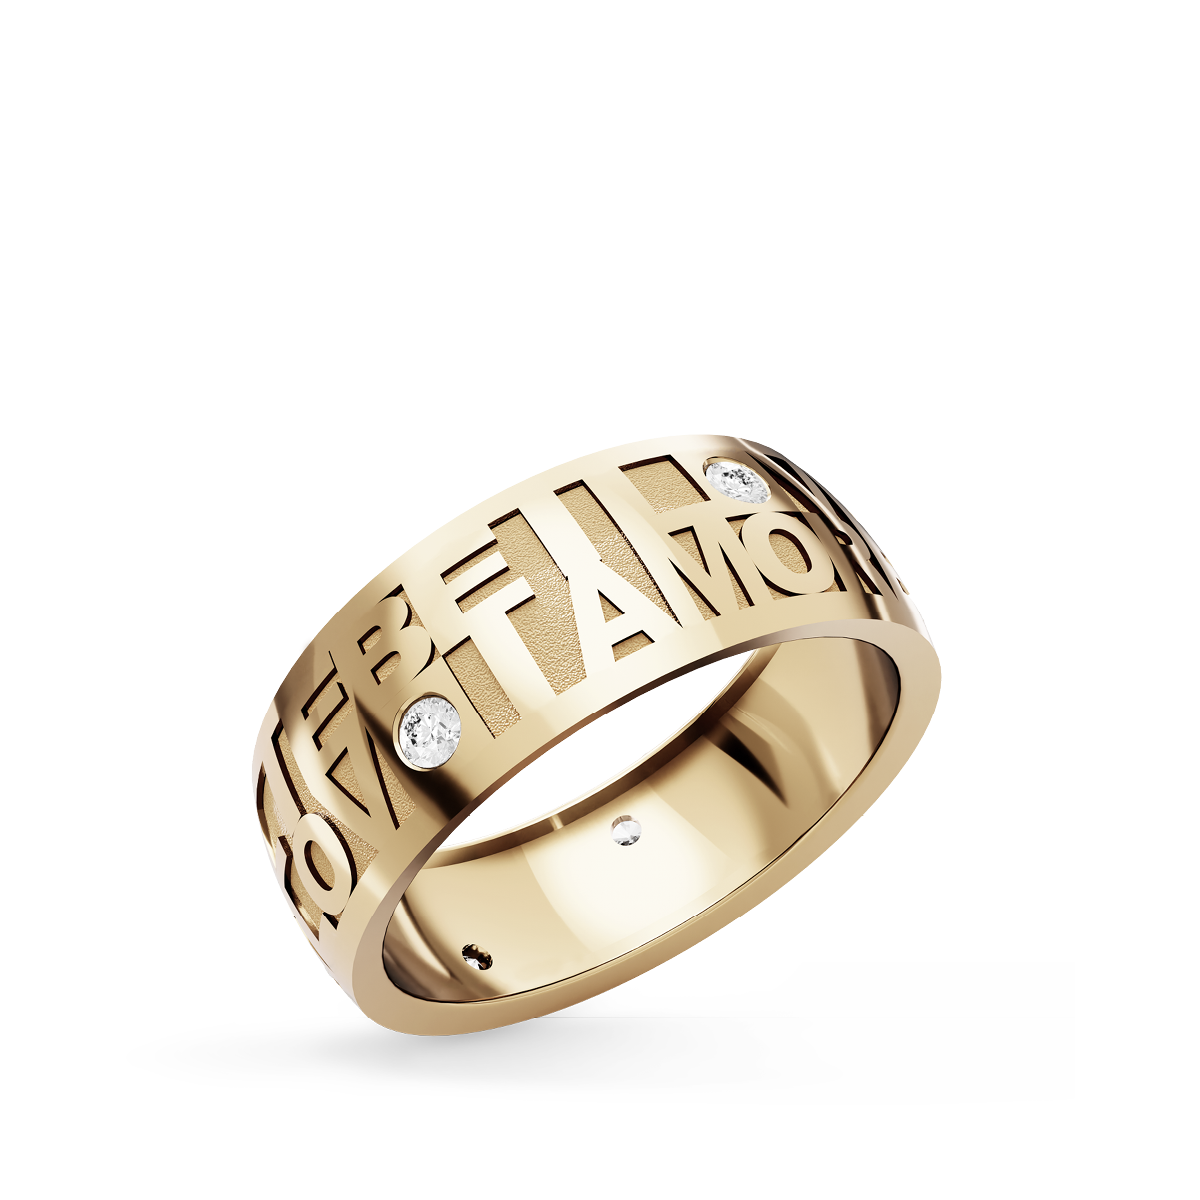 REQUEST A MOCK UP - Character Ring 7.0 Even Rings Luis & Freya   